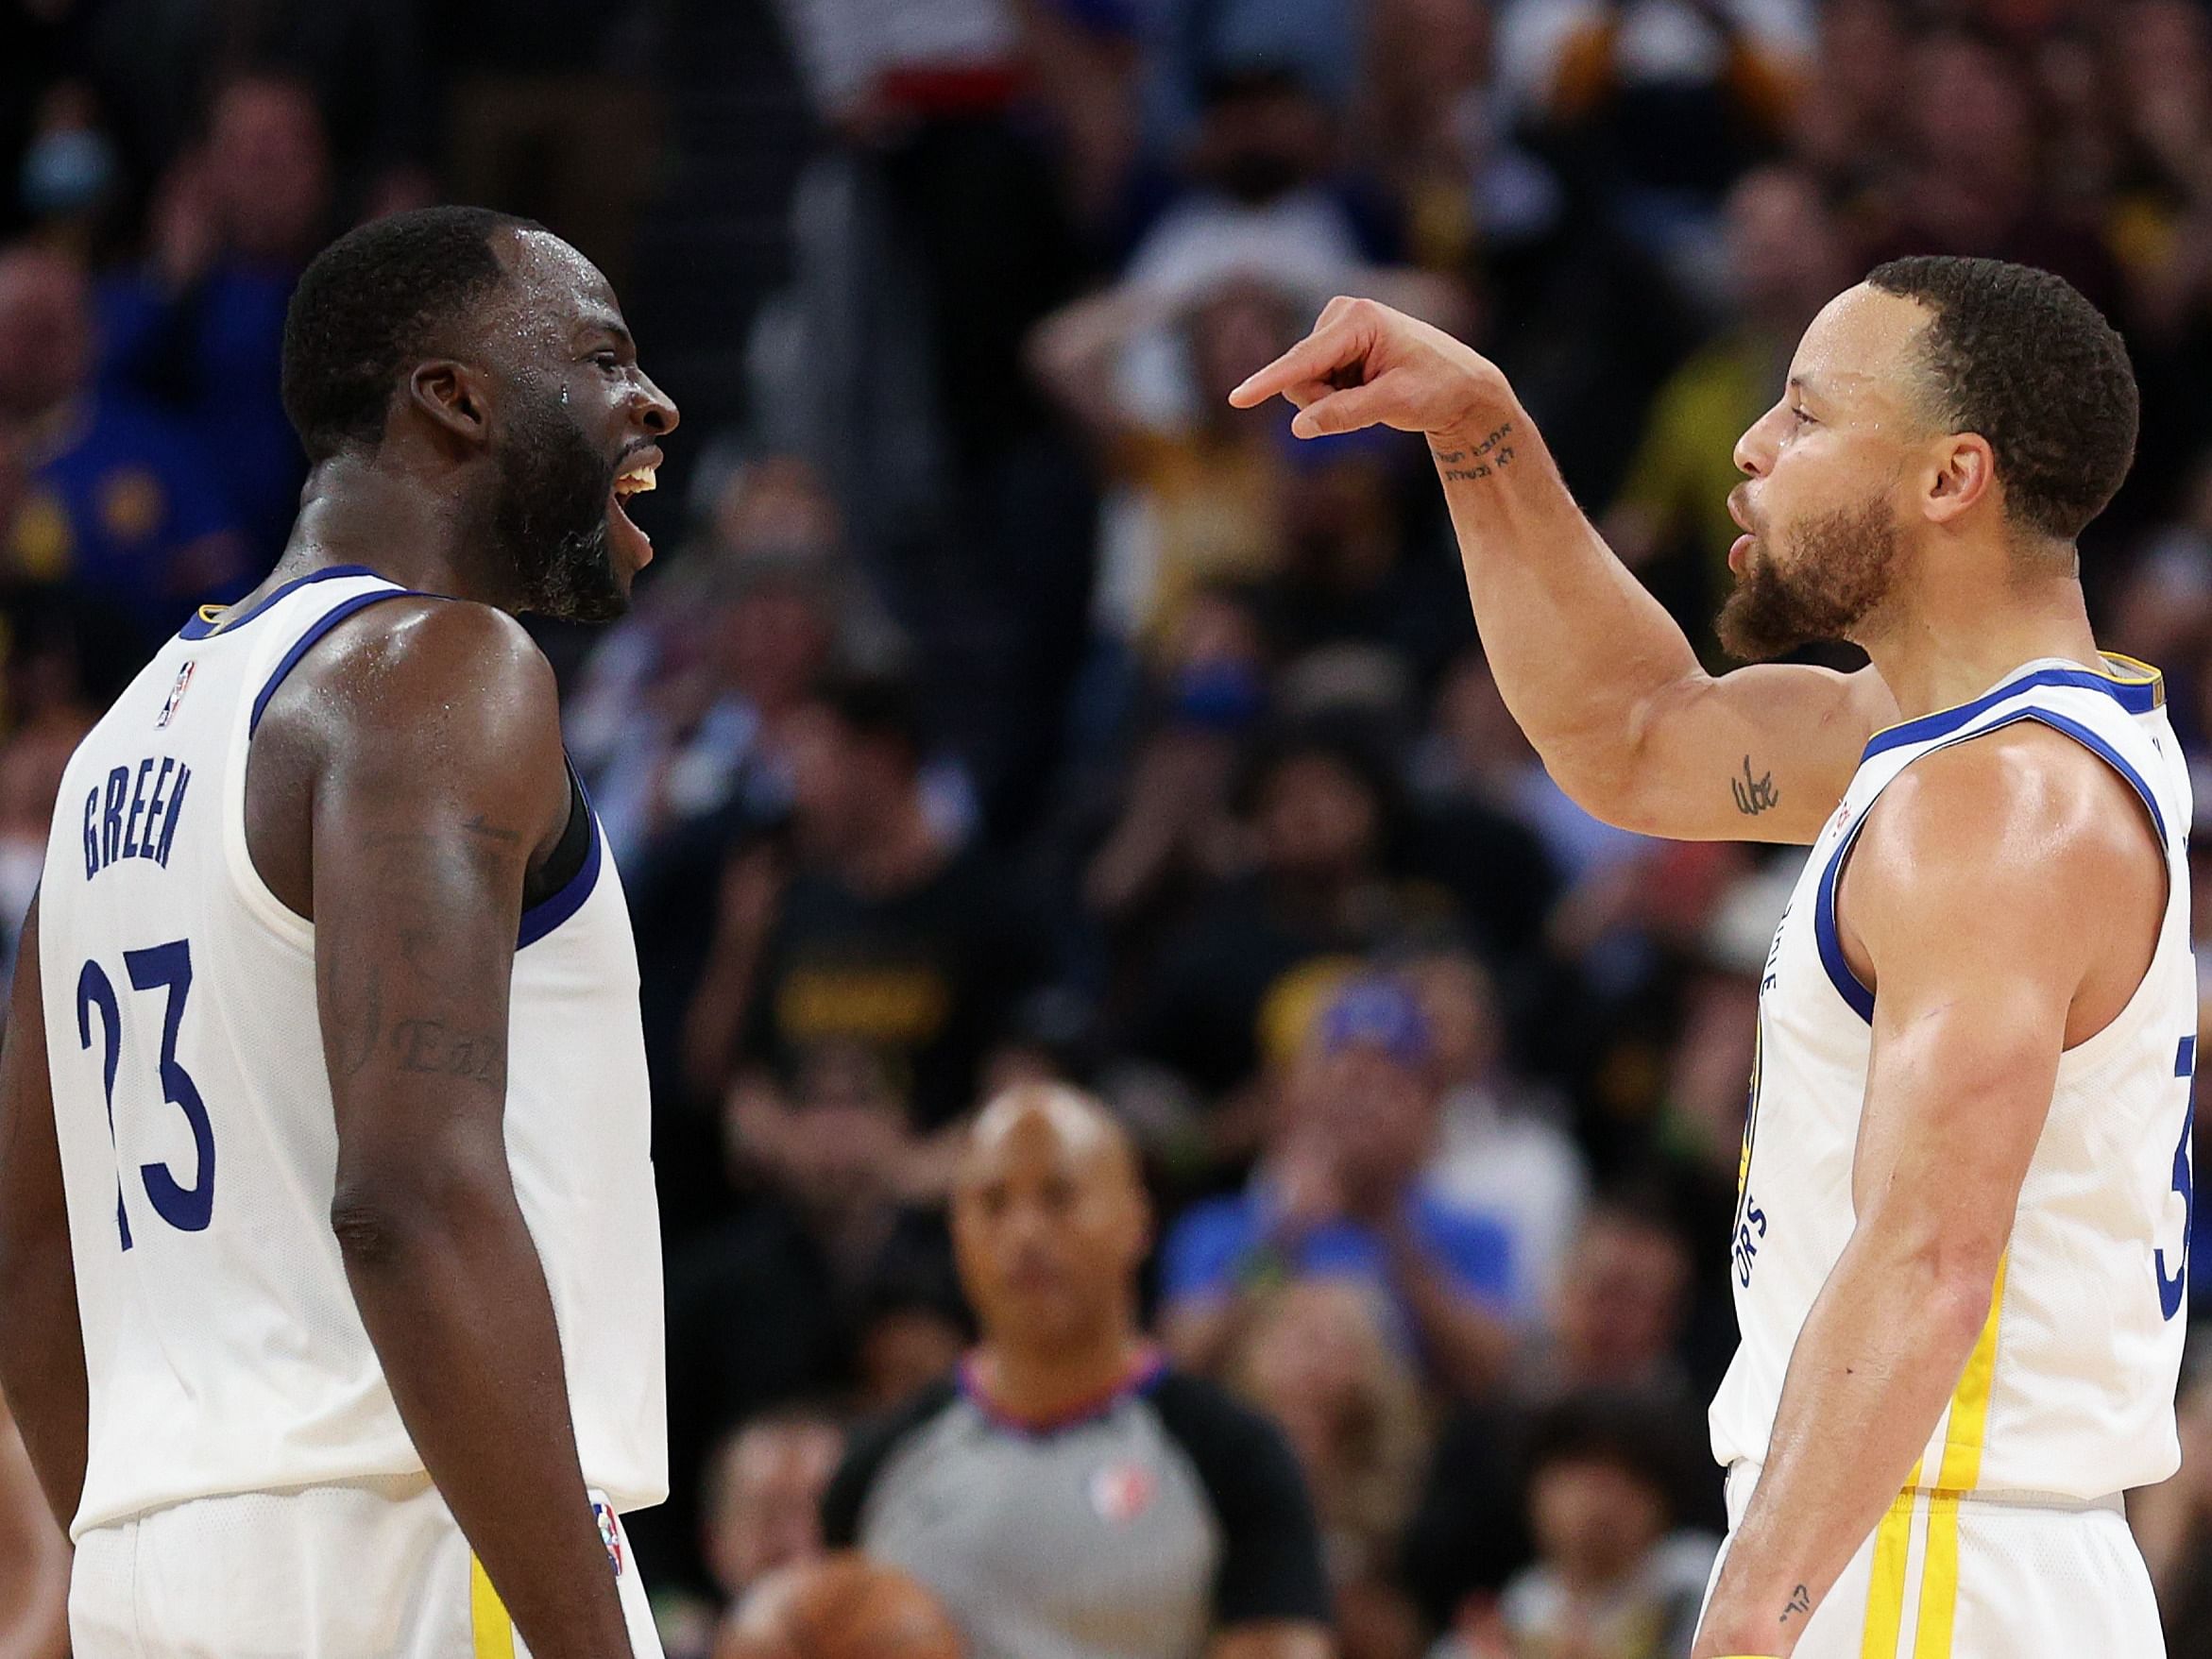 Read more about the article “Who you think is the GOAT?” – Draymond Green picks Steph Curry over Michael Jordan and LeBron James as his GOAT